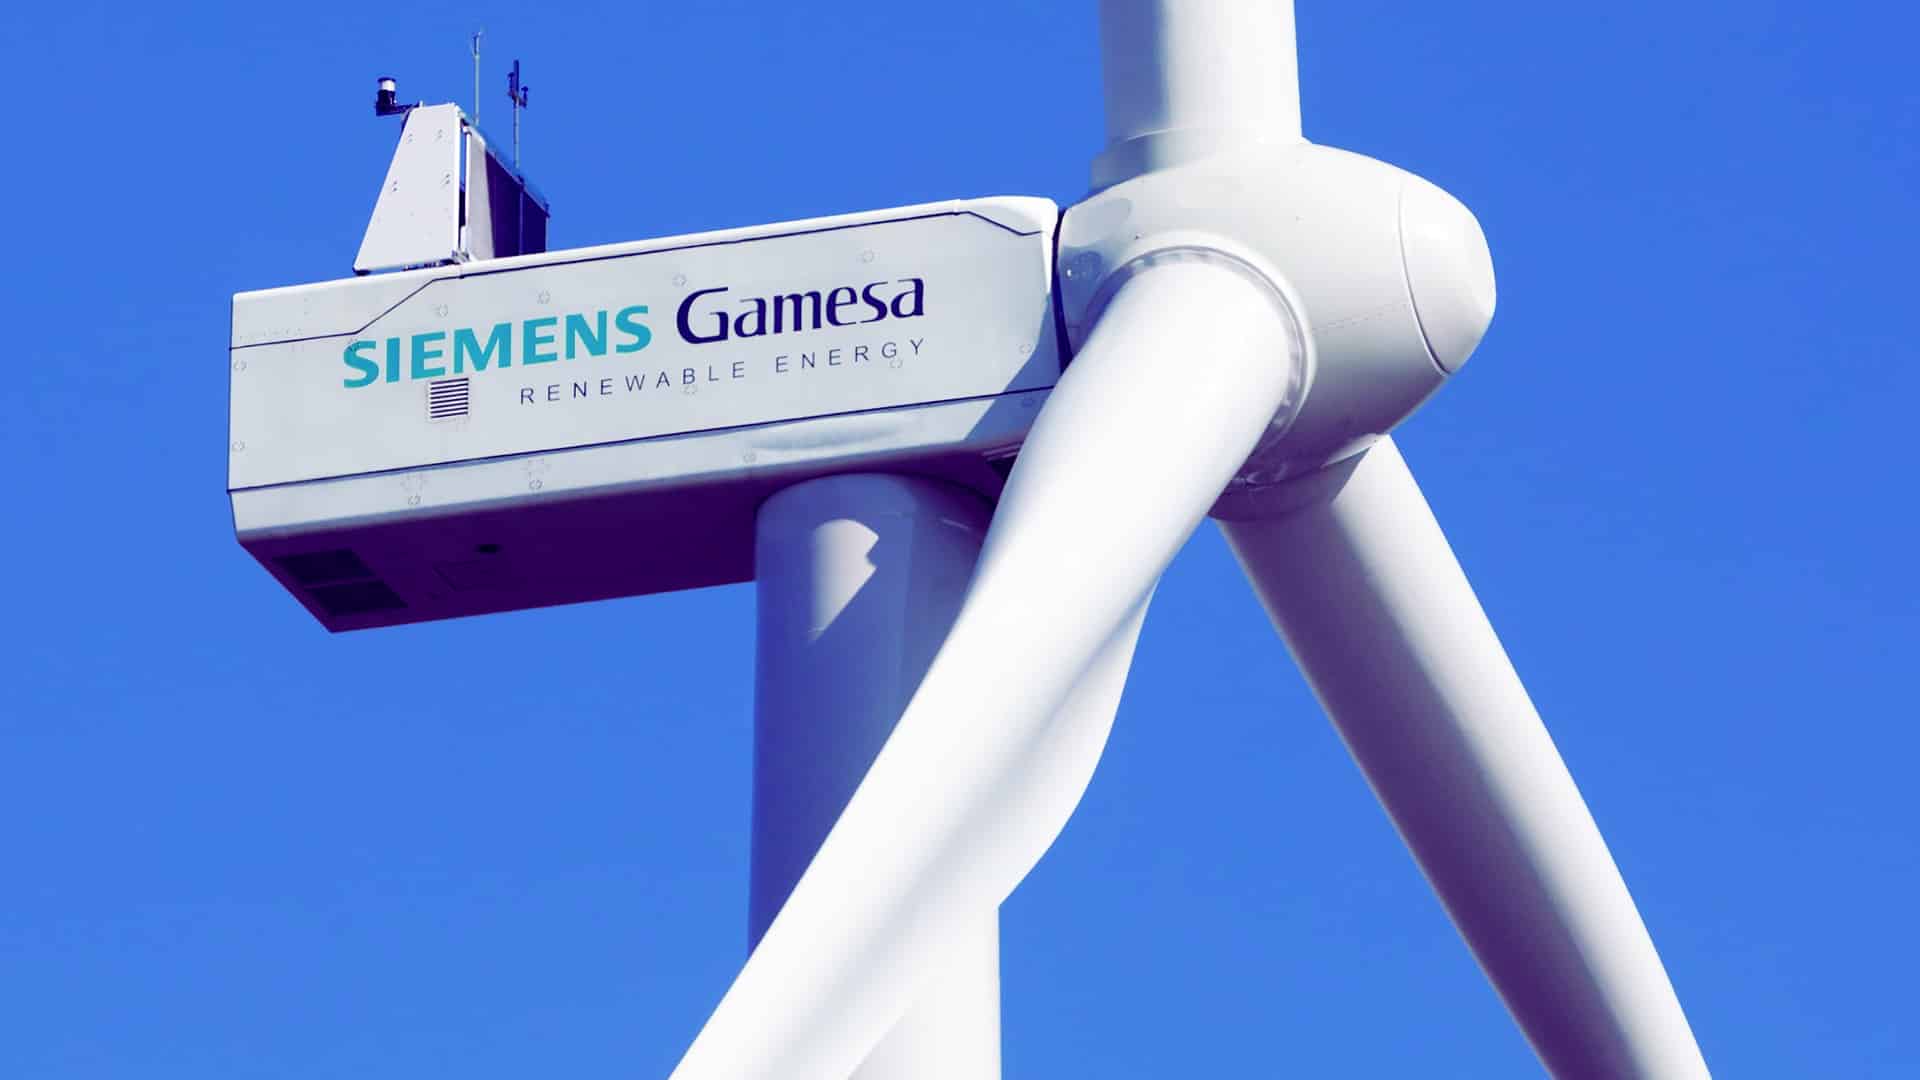 Infosys Collaborates with Siemens Gamesa Renewable Energy to Digitally Transform its Operations by Implementing SAP S/4HANA in 50+ Countries